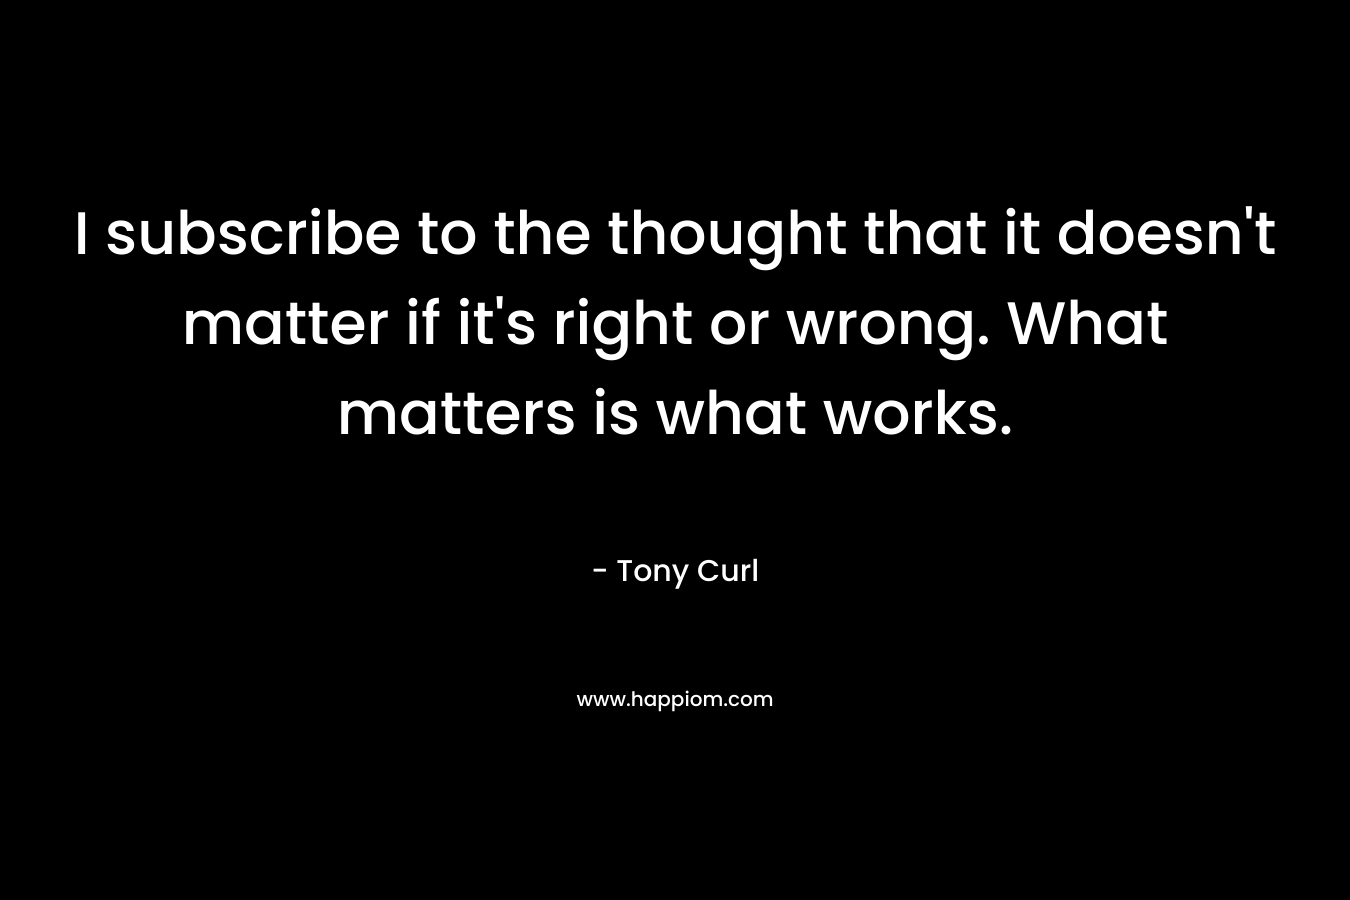 I subscribe to the thought that it doesn’t matter if it’s right or wrong. What matters is what works. – Tony Curl